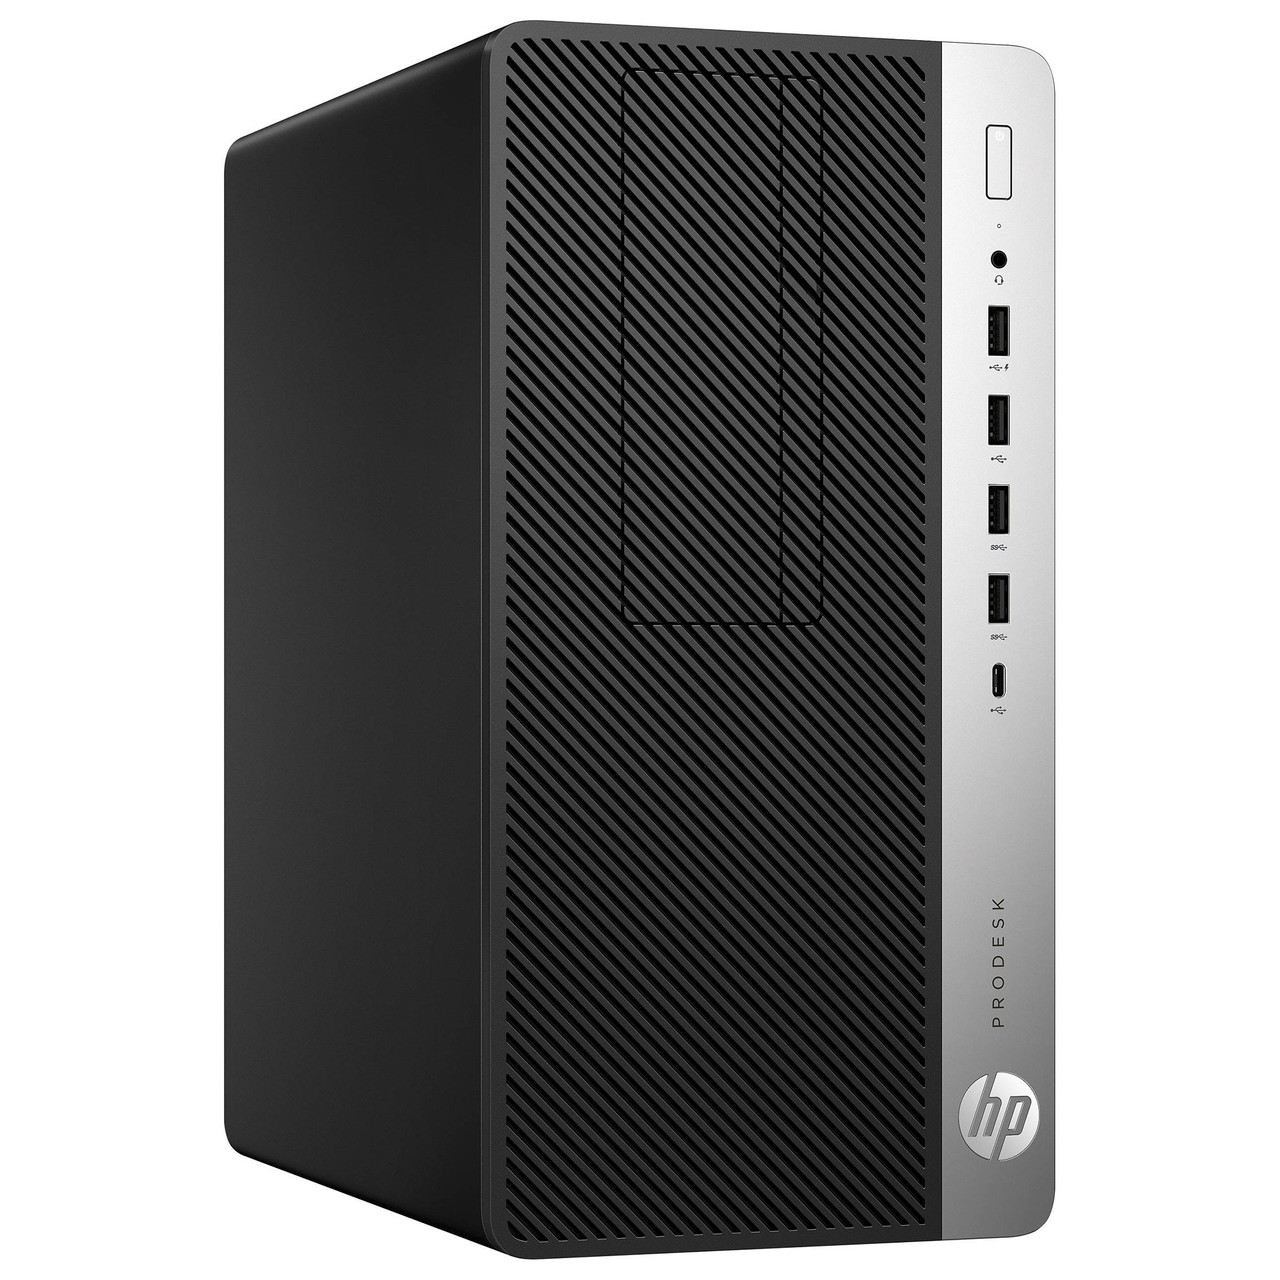 HP Refurbished ProDesk 600 G3 Tower Computer - Intel Core i5 (7th